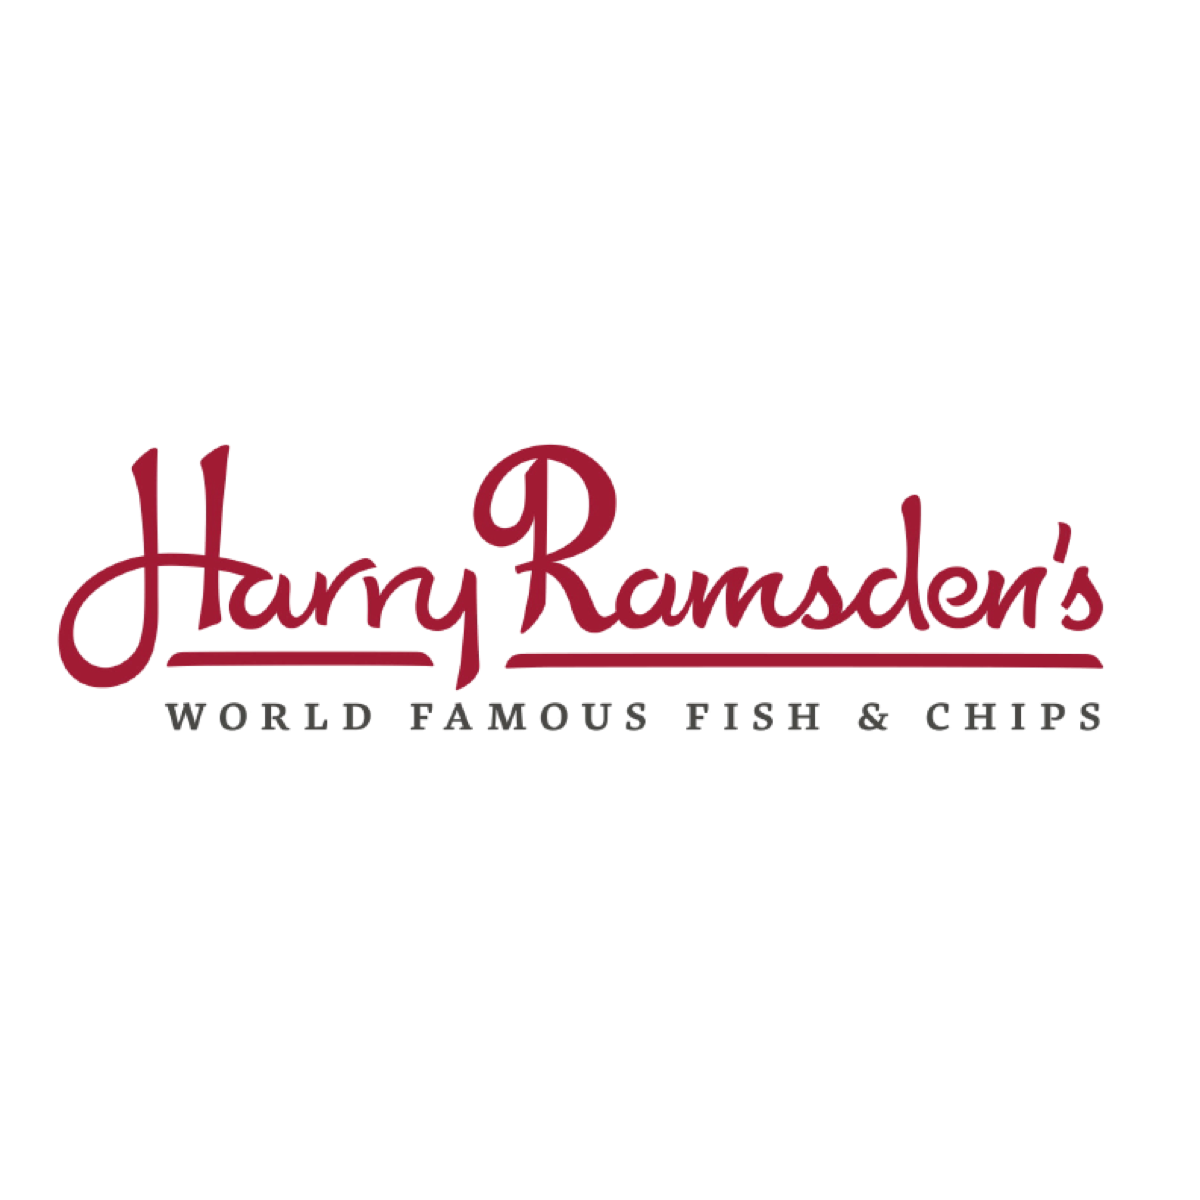 Harry Ramsden's Great Yarmouth 01493 330444